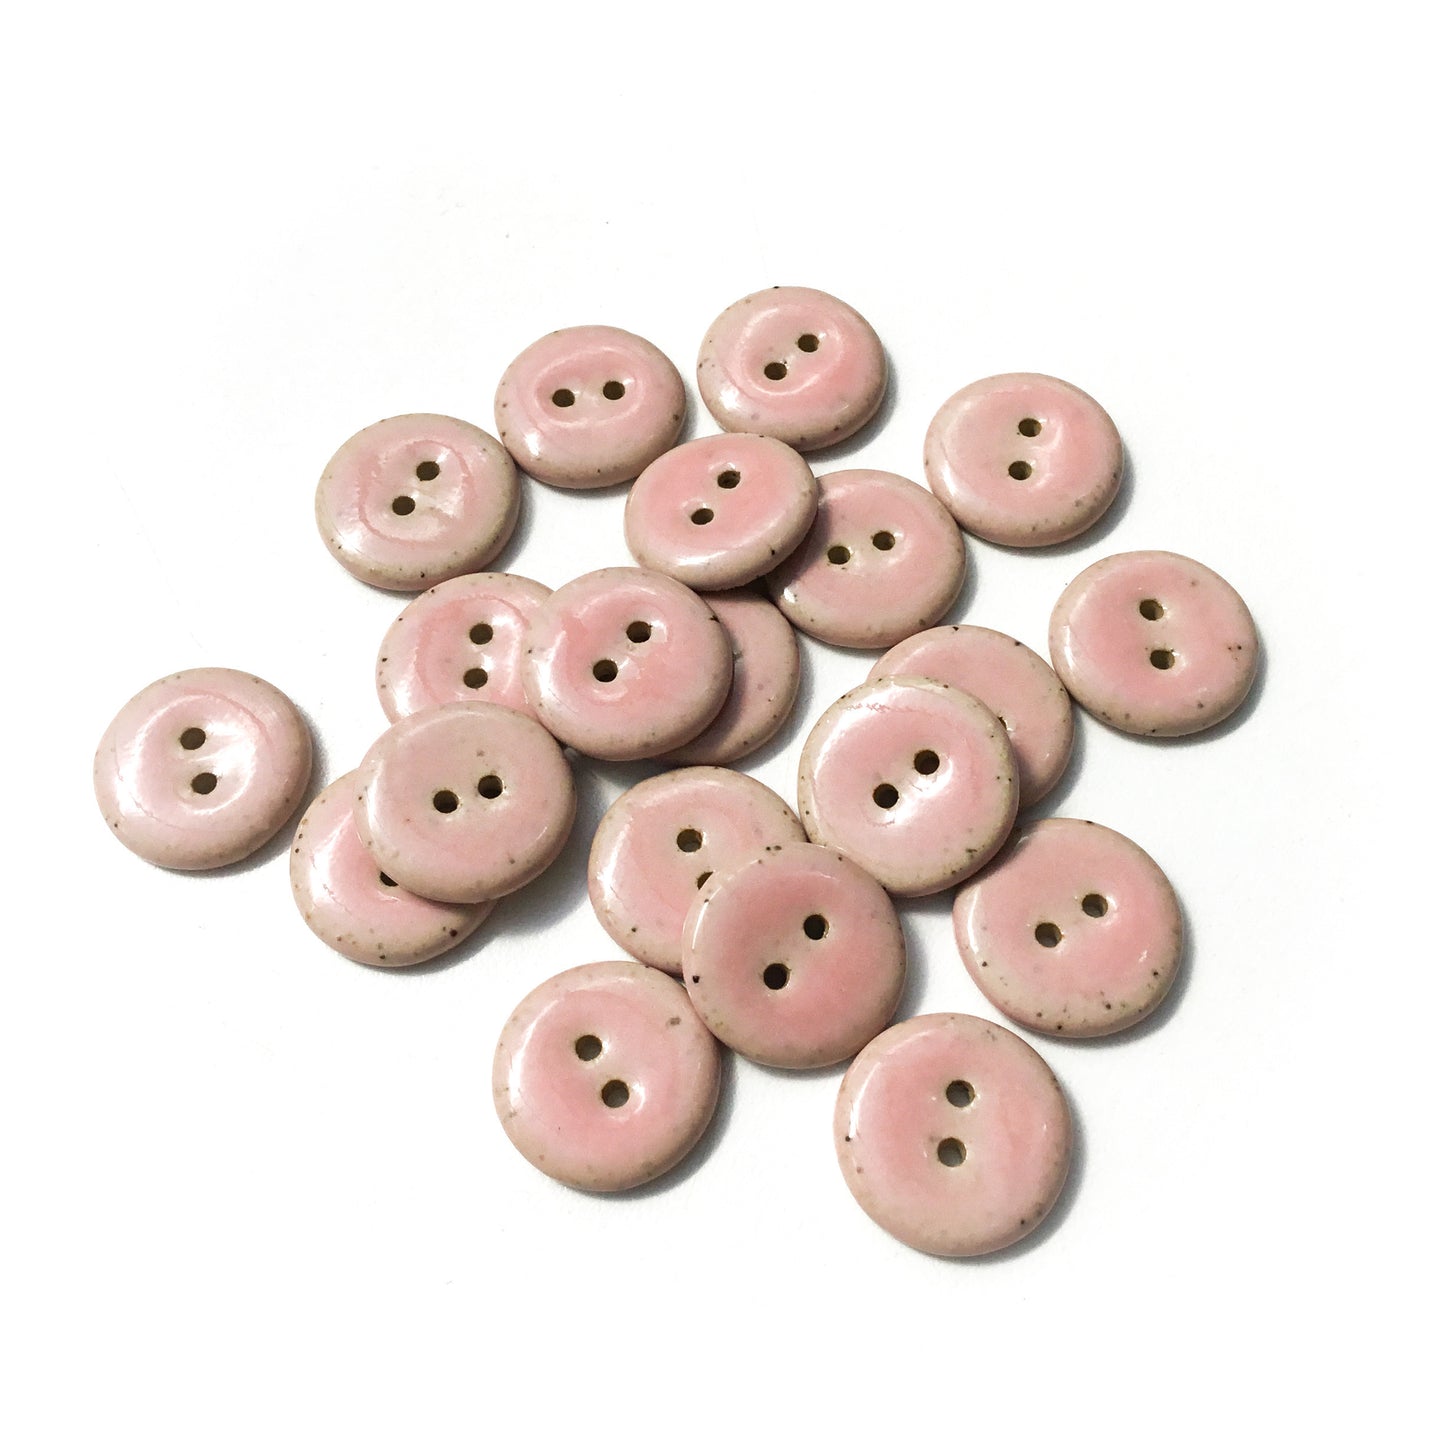 Soft Pink Ceramic Stoneware Buttons - 3/4"